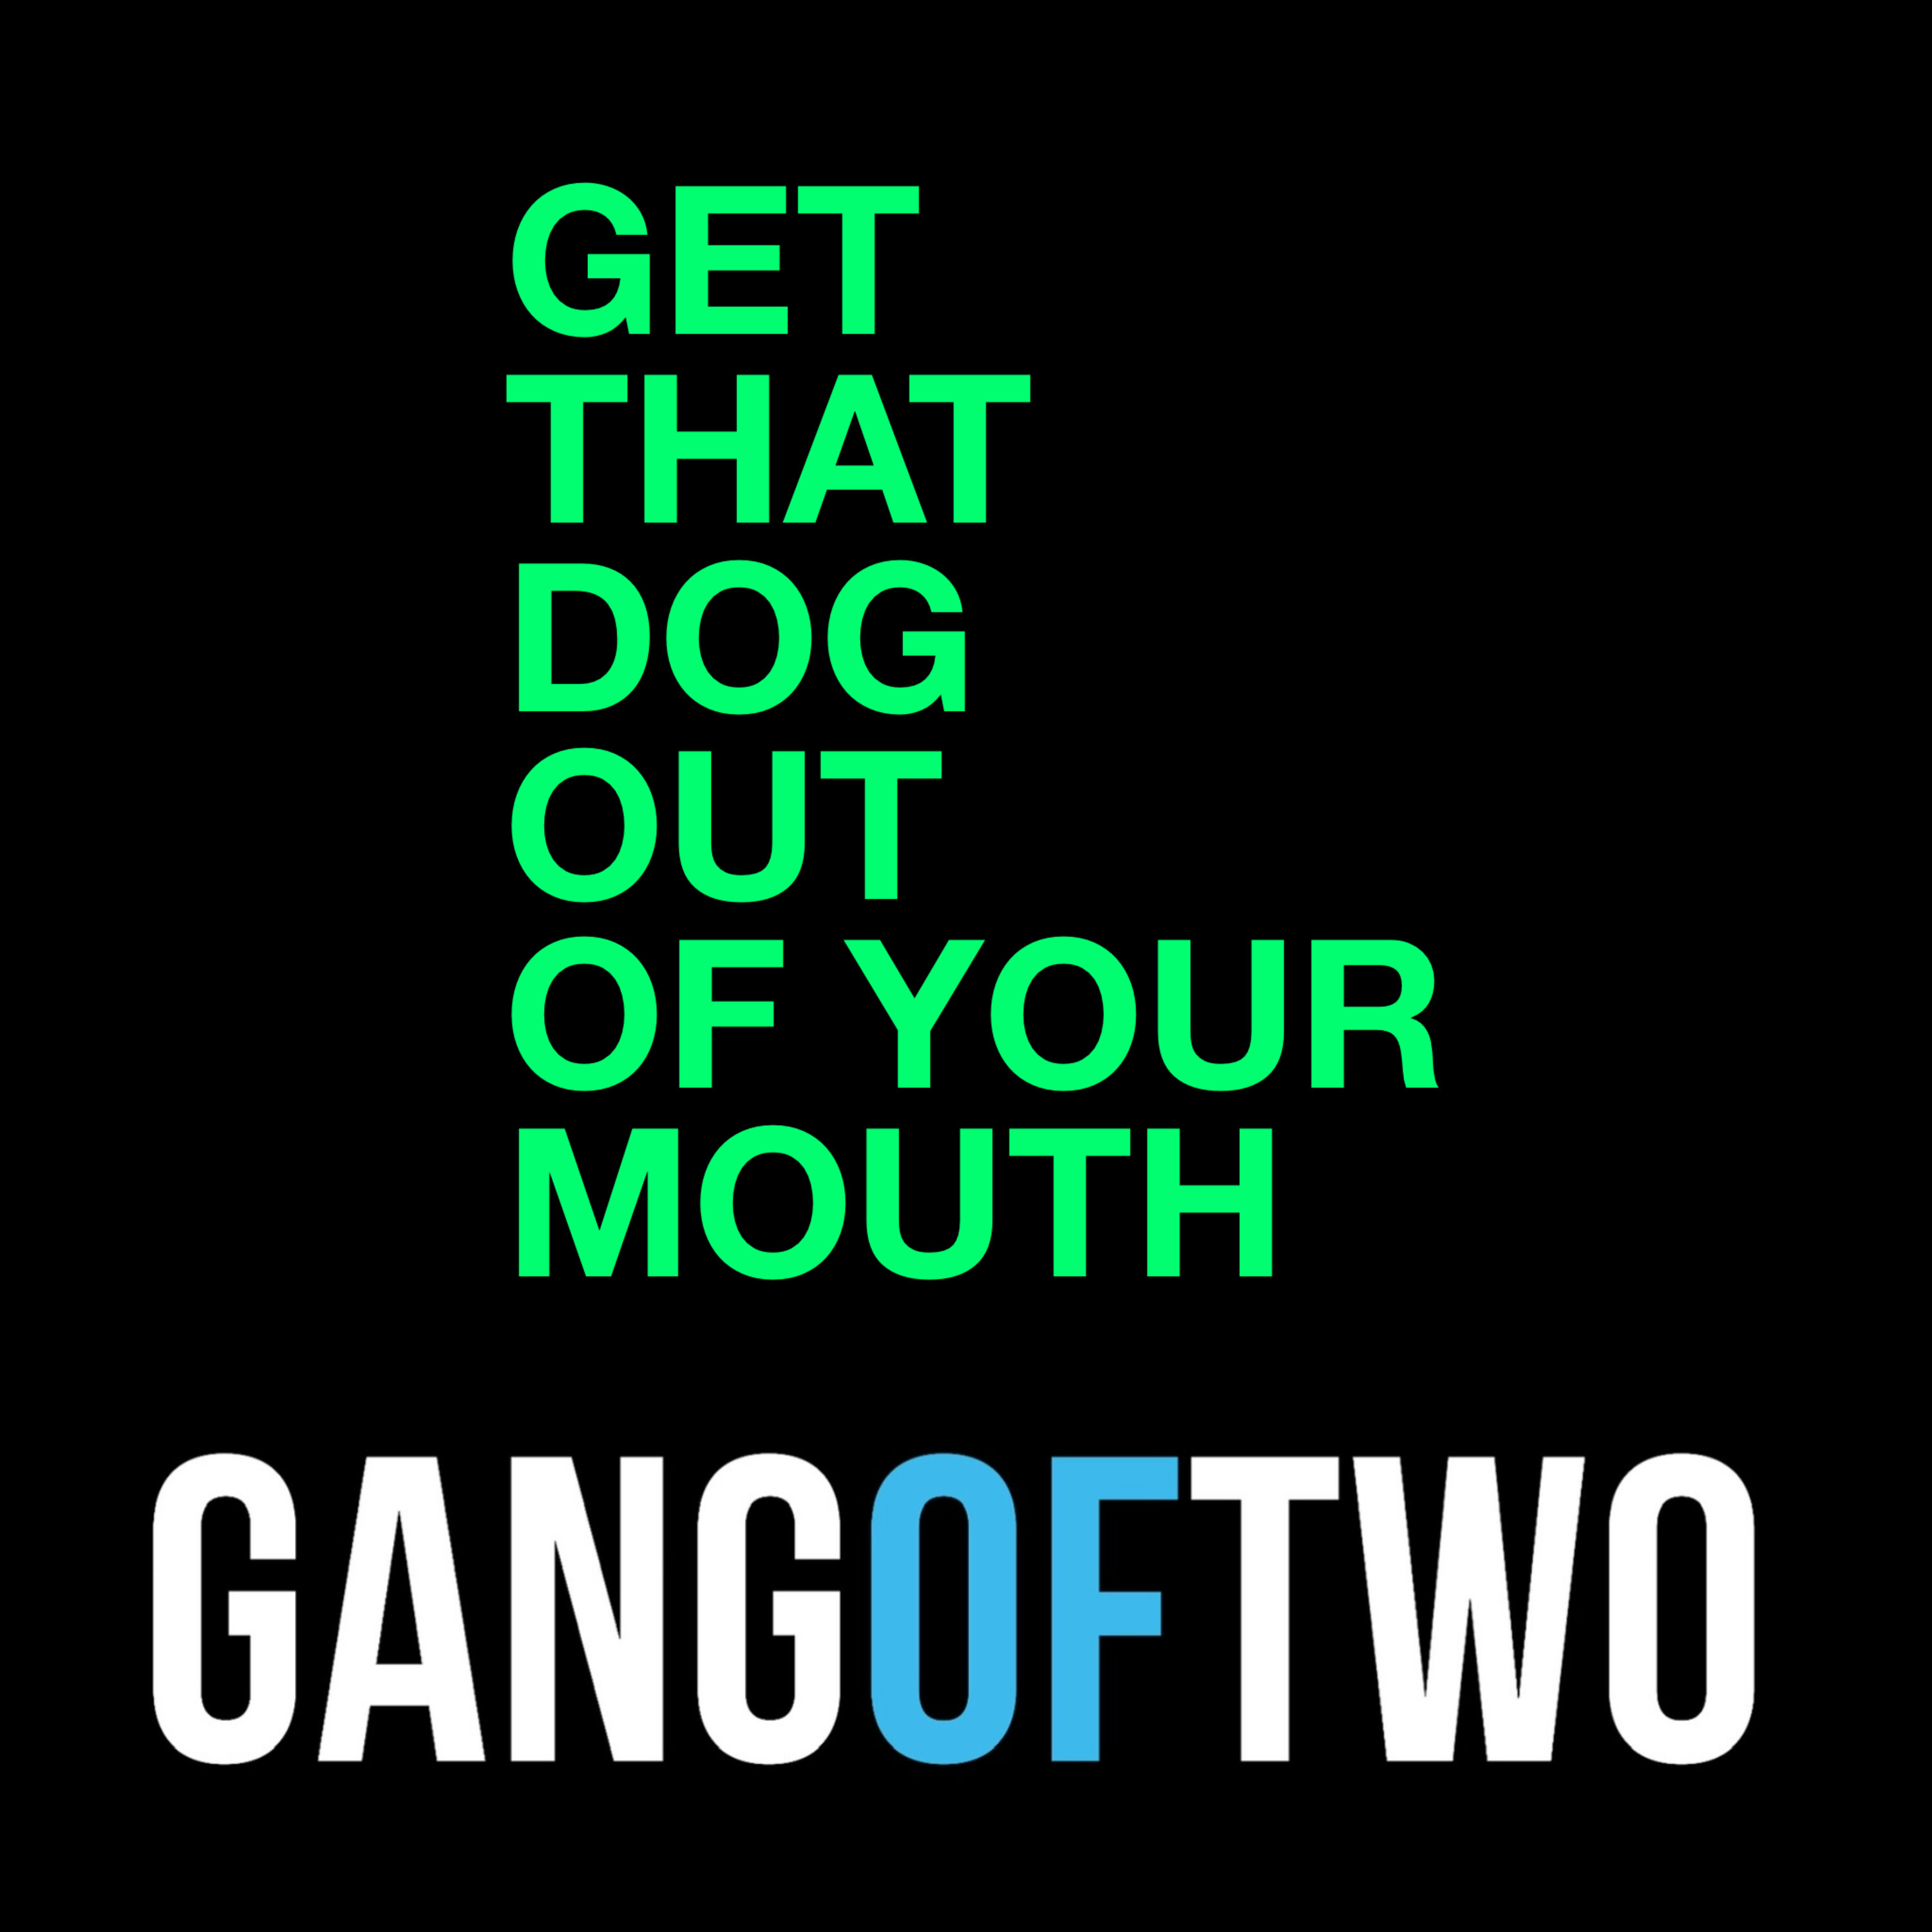 GET THAT DOG OUT OF YOUR MOUTH Image